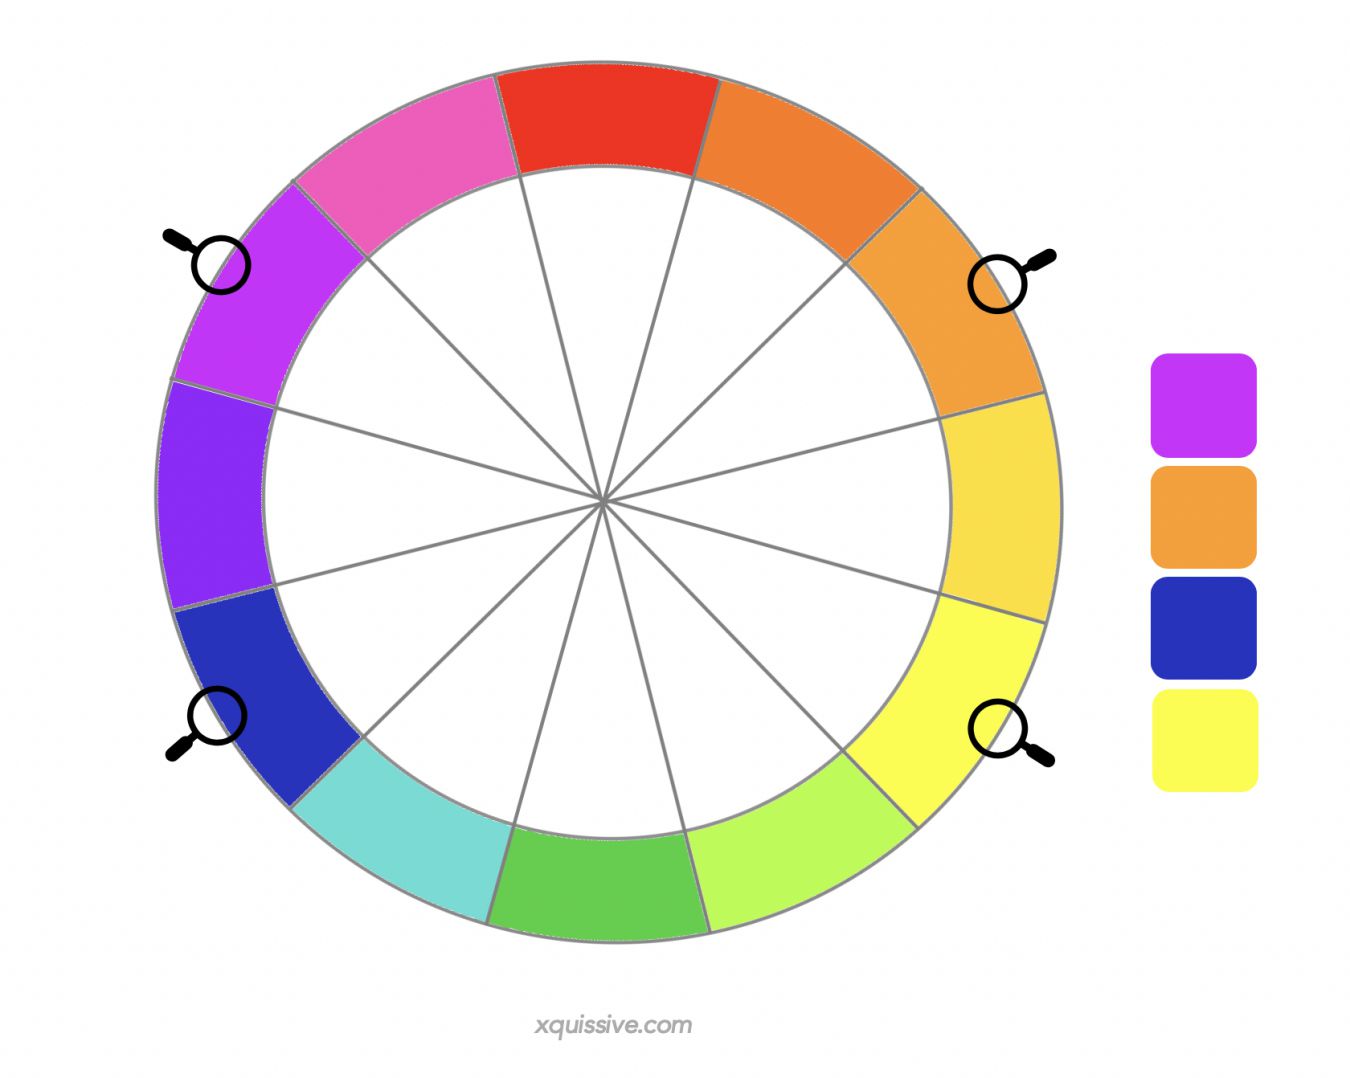 tetradic colours - colour theory in design